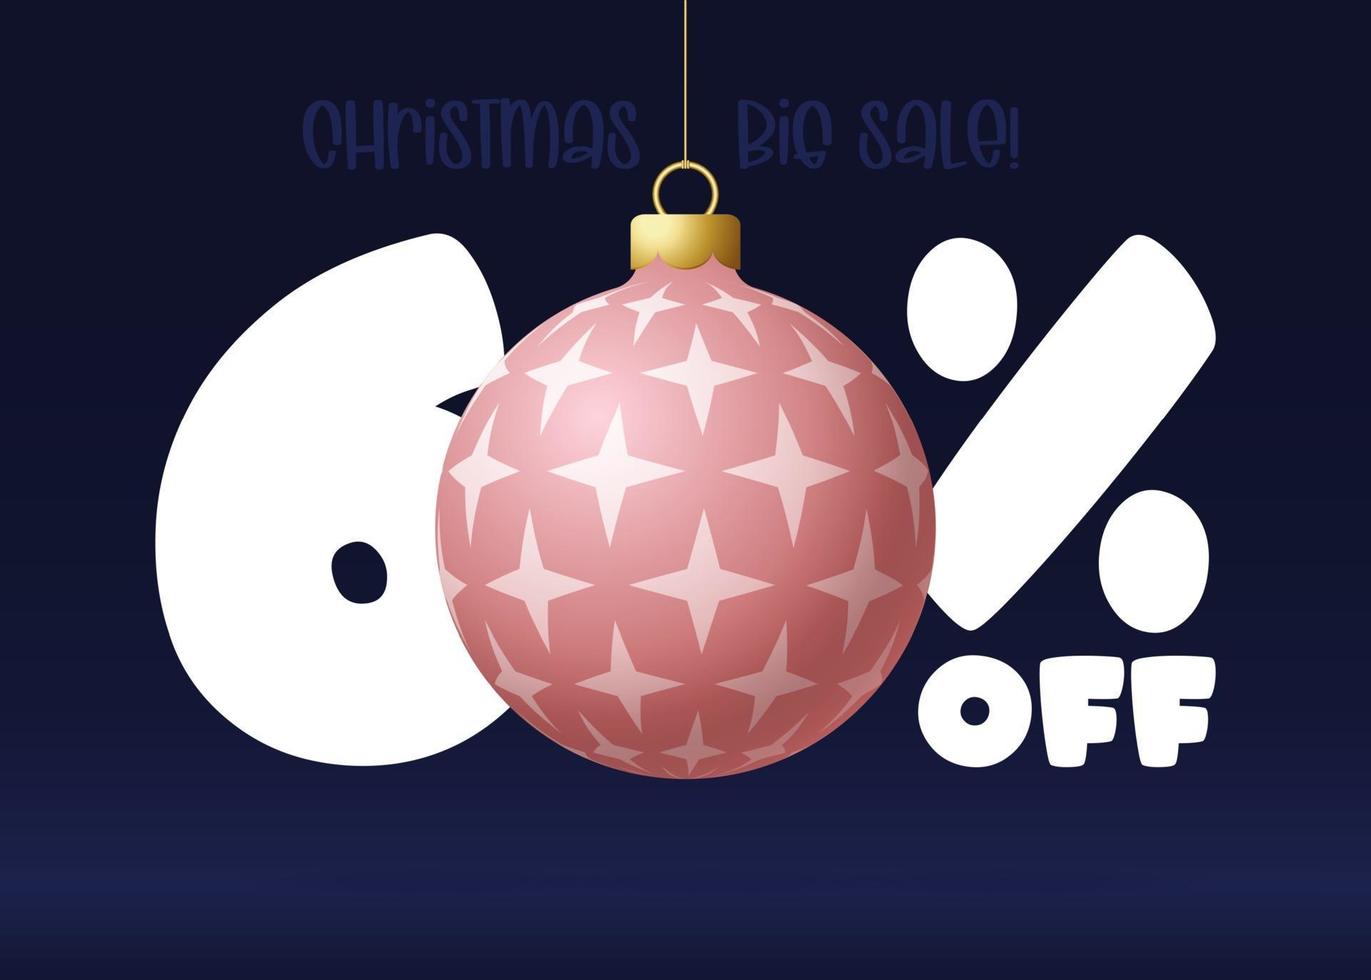 Merry christmas big Sale banner. Christmas Sale 60 percent off banner vector